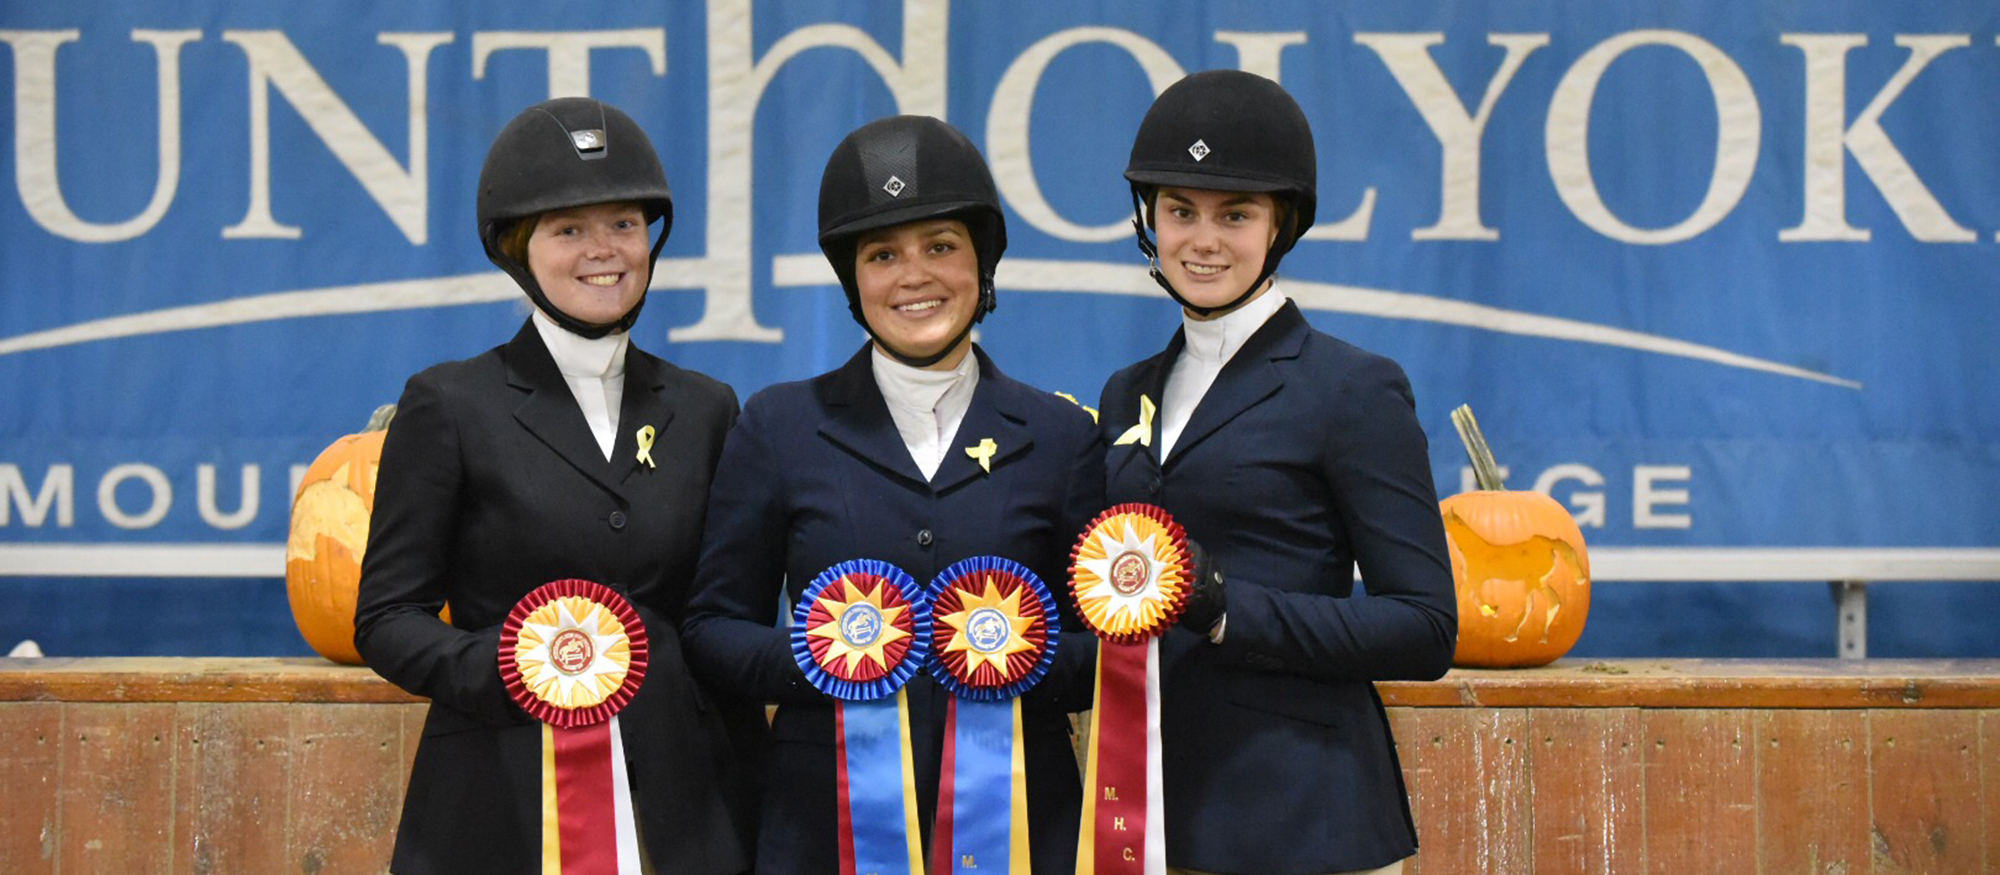 Photo of Lyons riding student-athletes Sara Hearn, Indra Rapinchuk-Souccar and Sierra Dunn following the October 27th, 2018 Home Show.